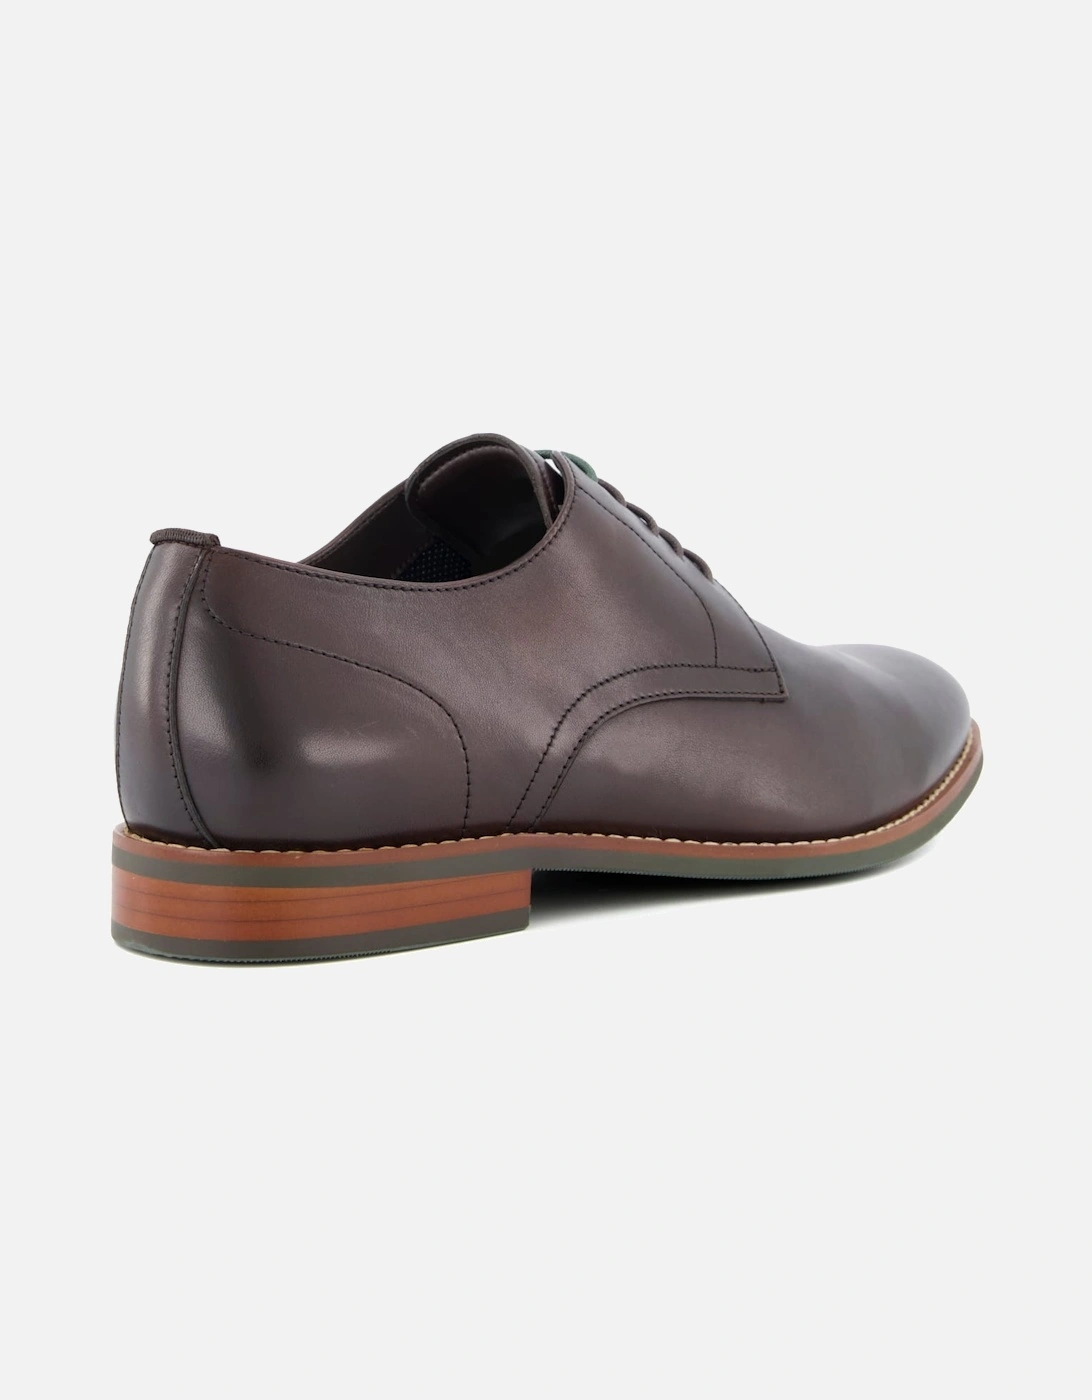 Dune Mens Suffolks - Leather Smart Gibson Shoes